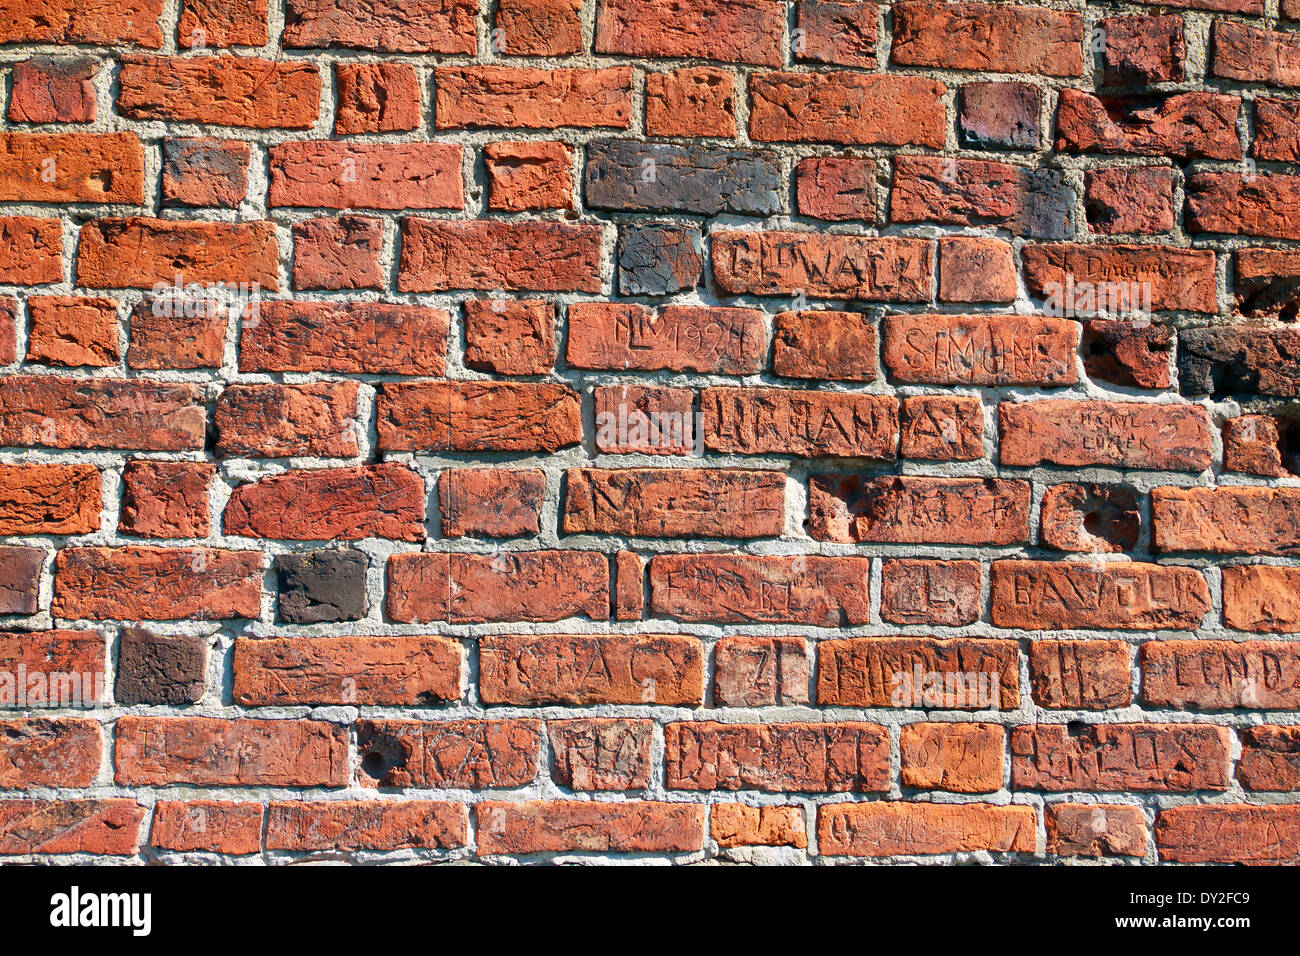 Brick wall inscriptions, words and letters Stock Photo